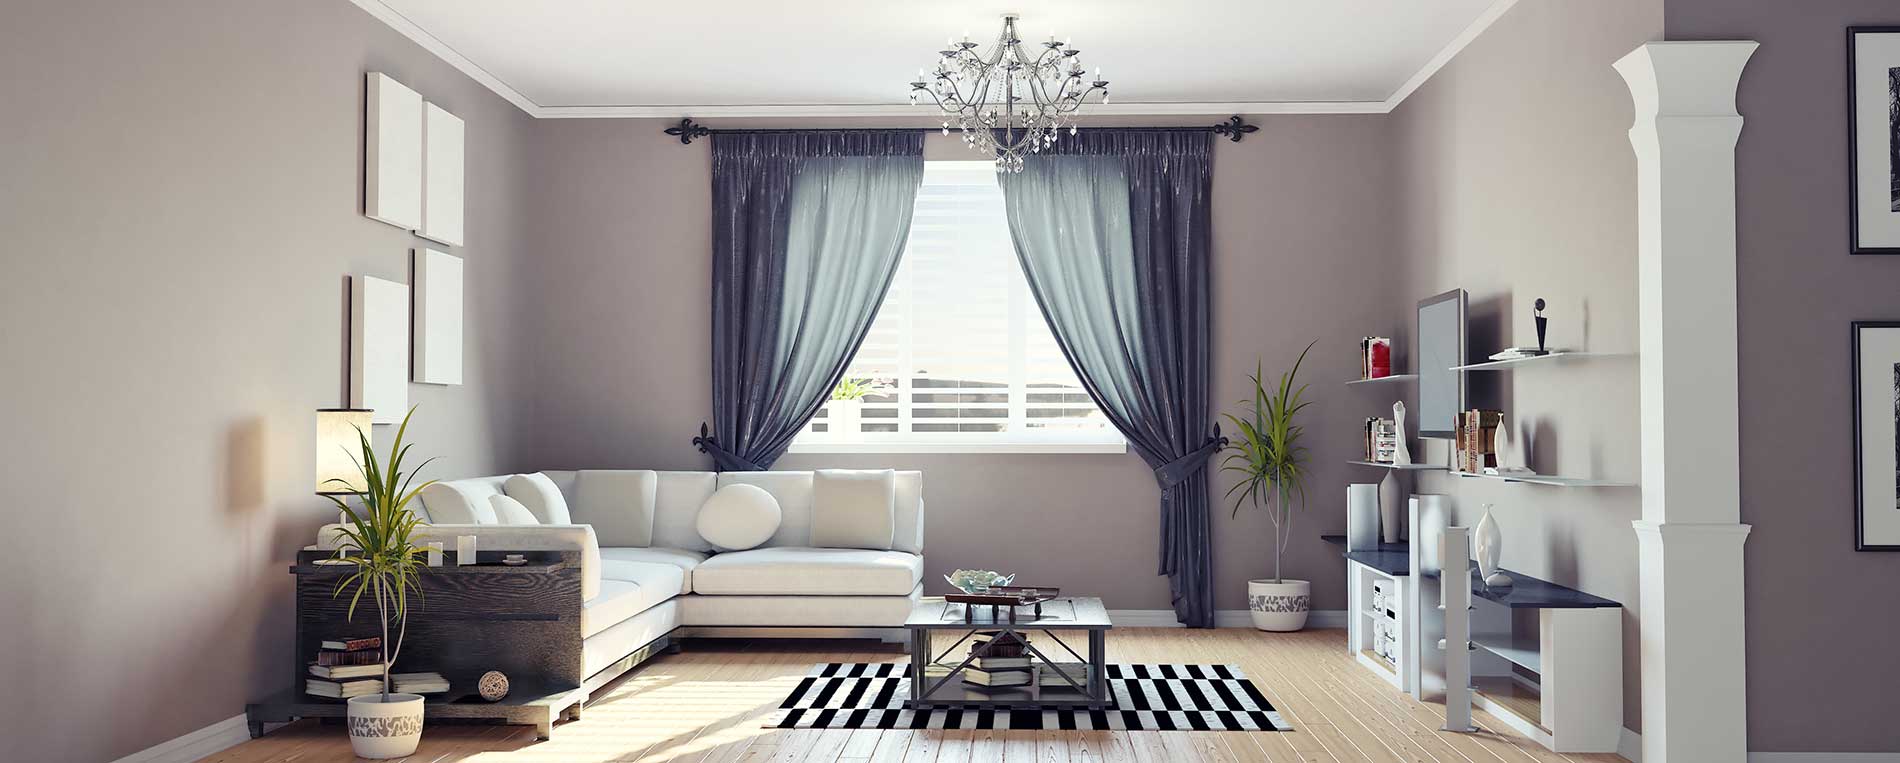 3 Great Ways to Style Your Blinds